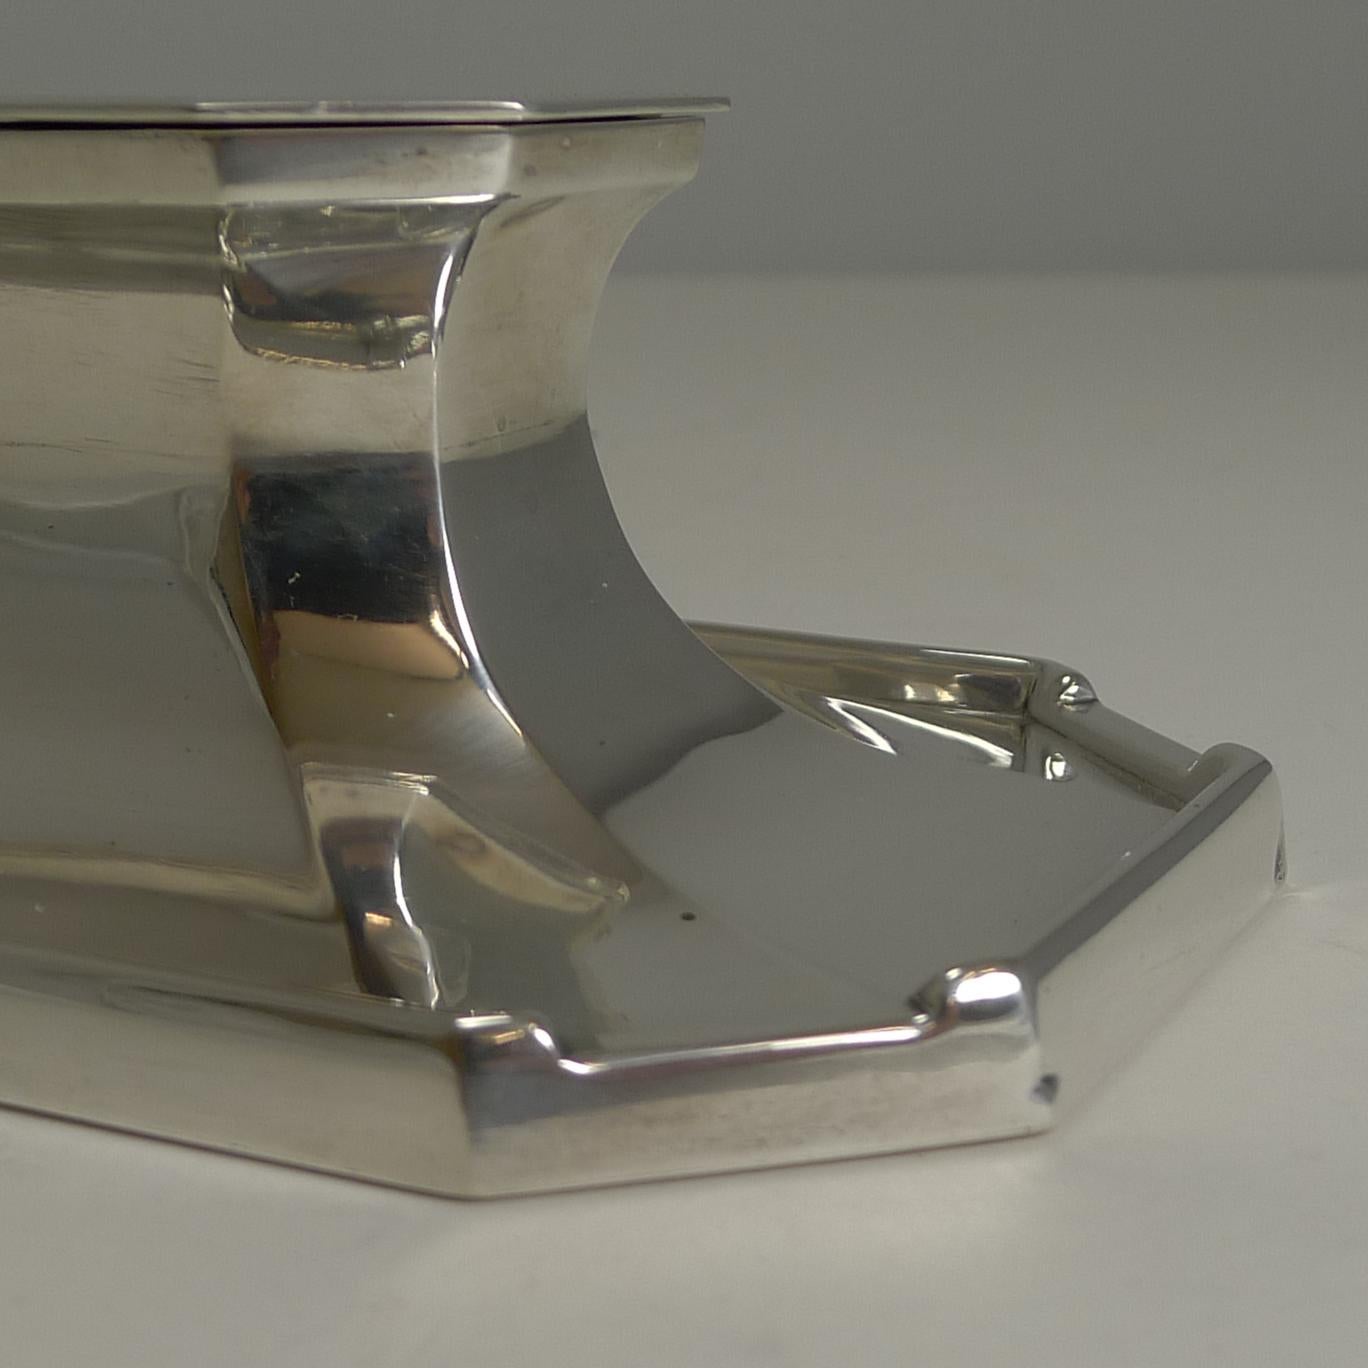 A terrific vintage English sterling silver inkwell of rectangular form with cut-outs to the four corners of the base to rest a pen.

Very stylish and fabulous quality having been made by the top-notch silversmith, Deakin and Francis. There is a